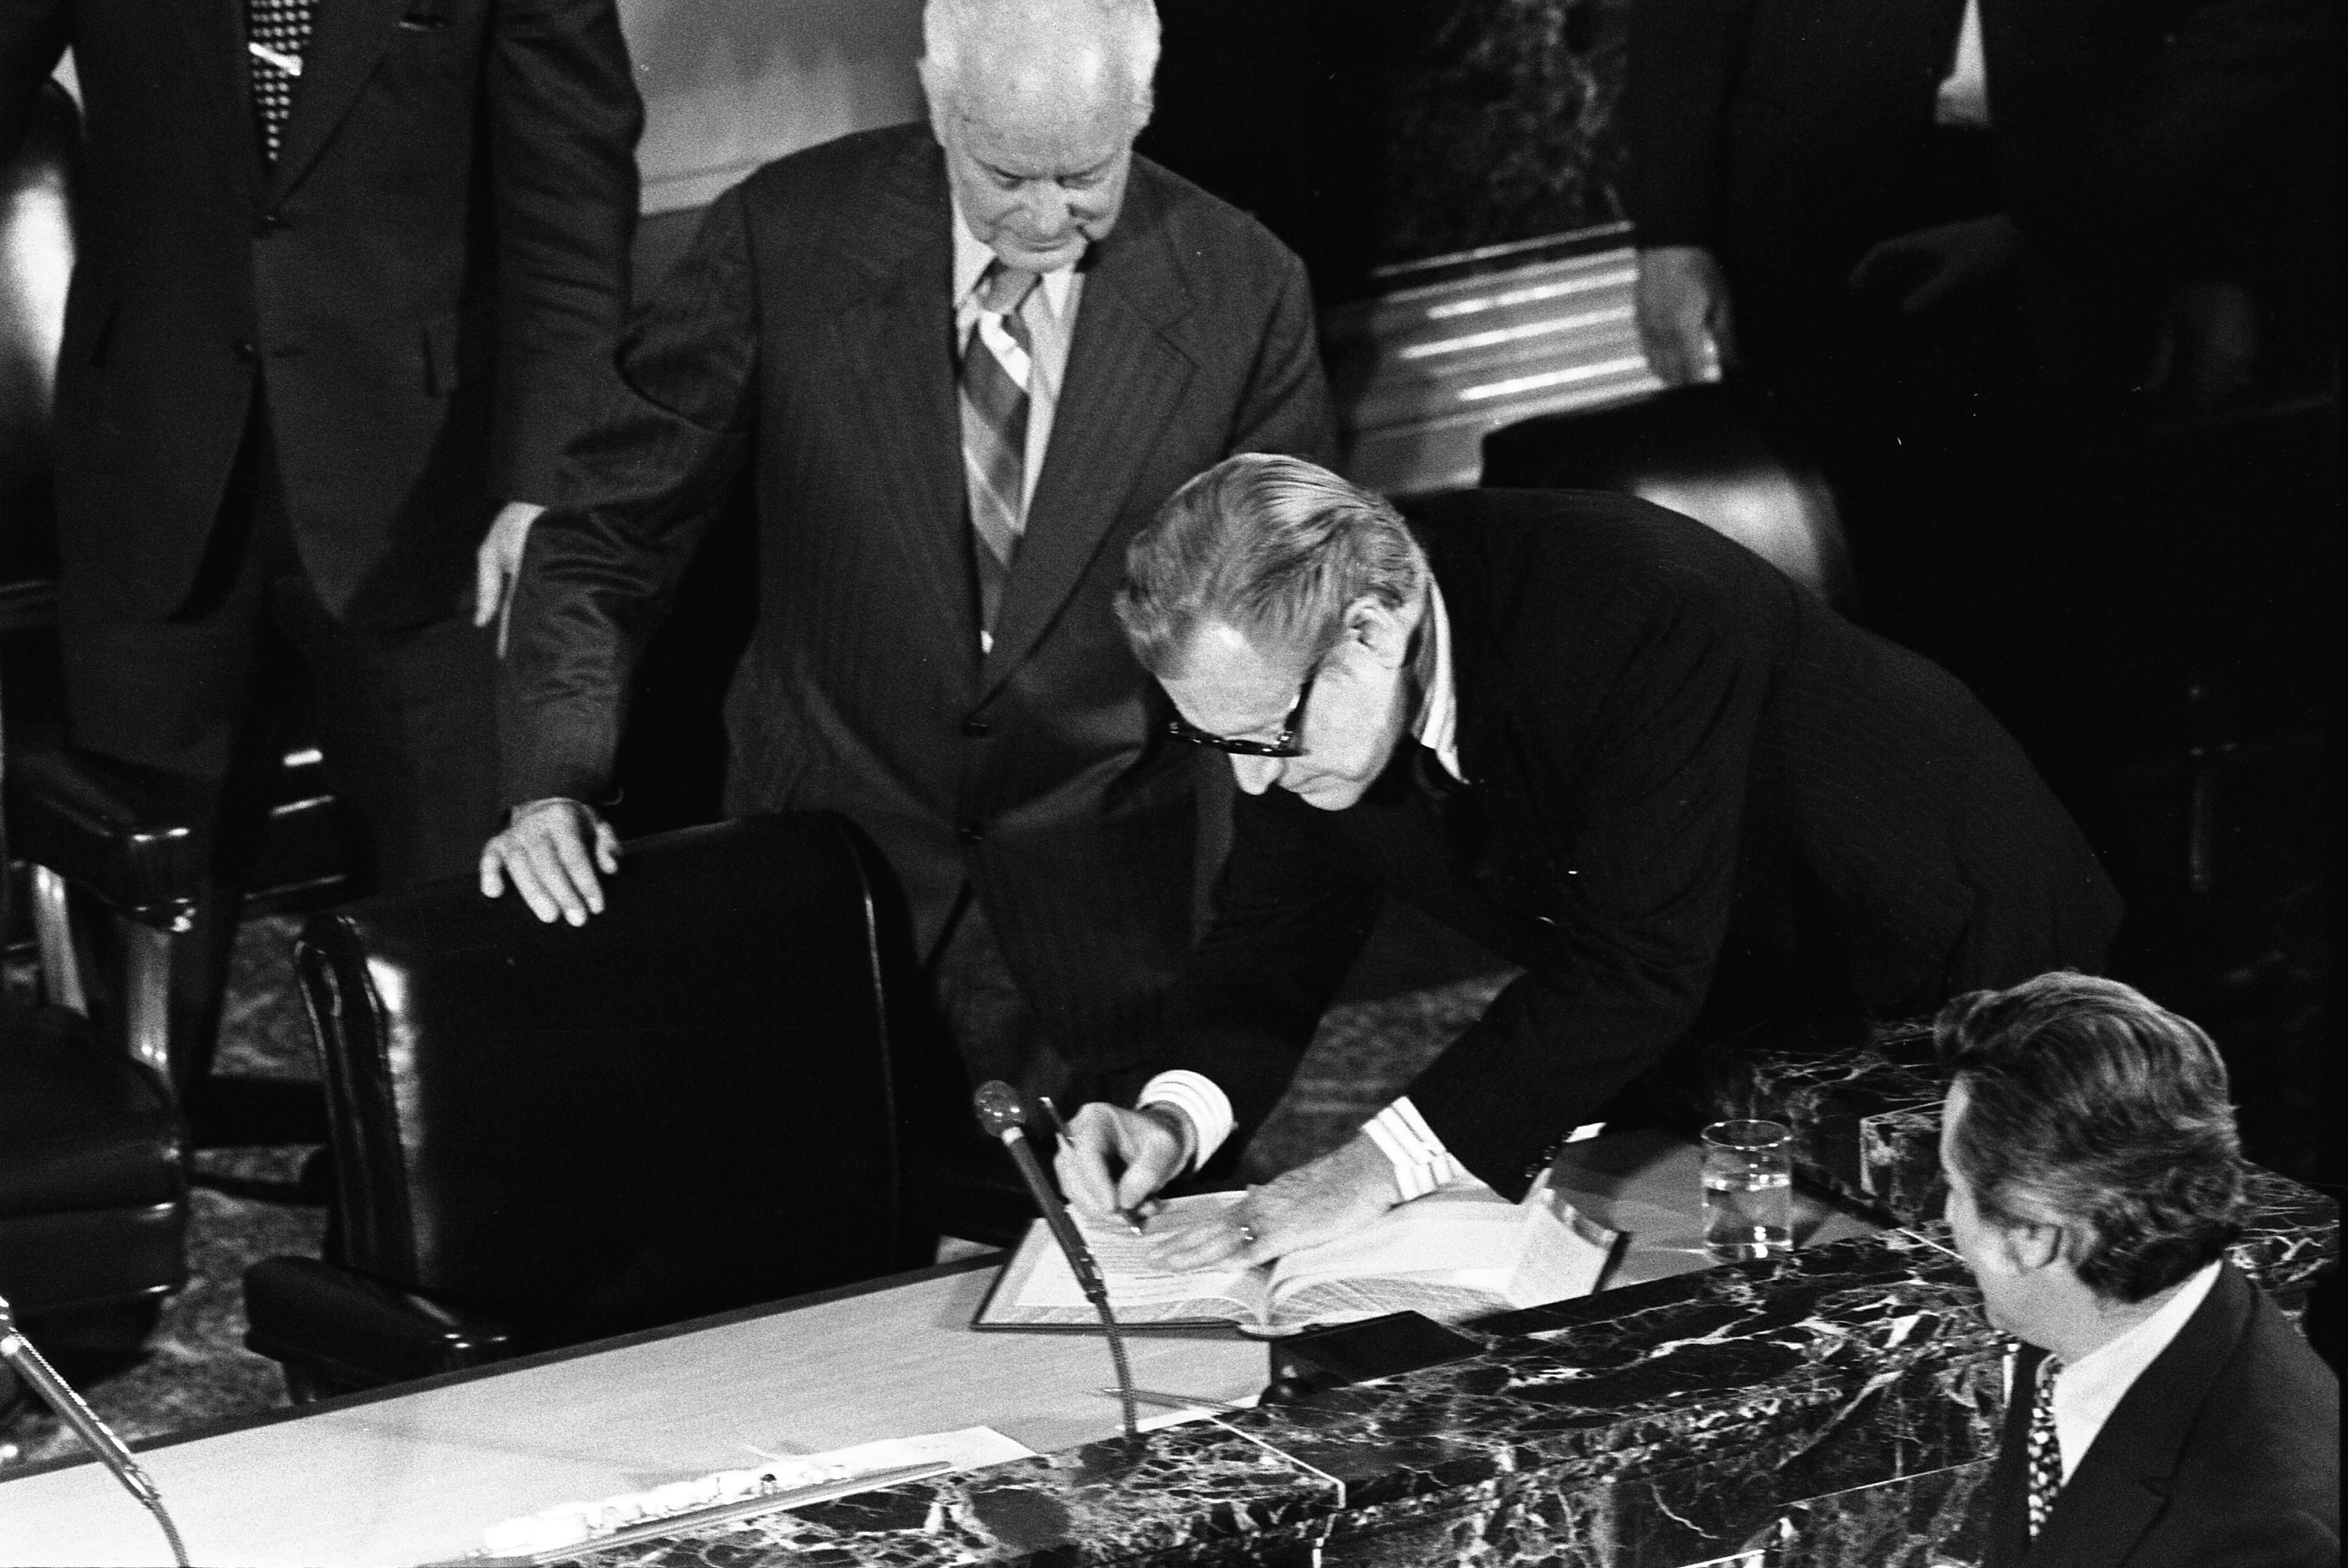 Nelson Rockefeller signing Senate book before addressing the joint assembly.